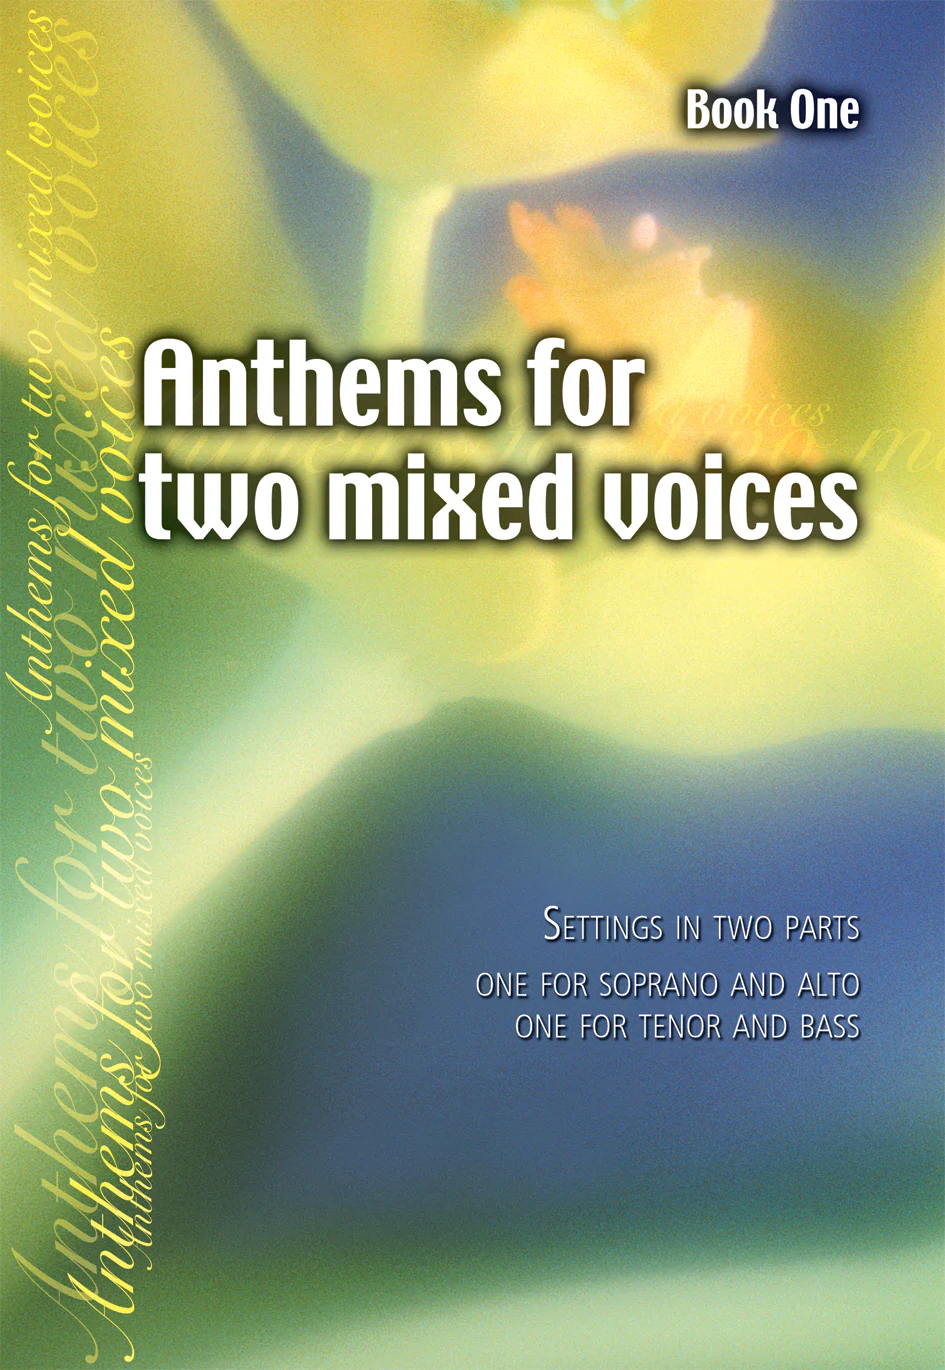 Anthems for two mixed voices